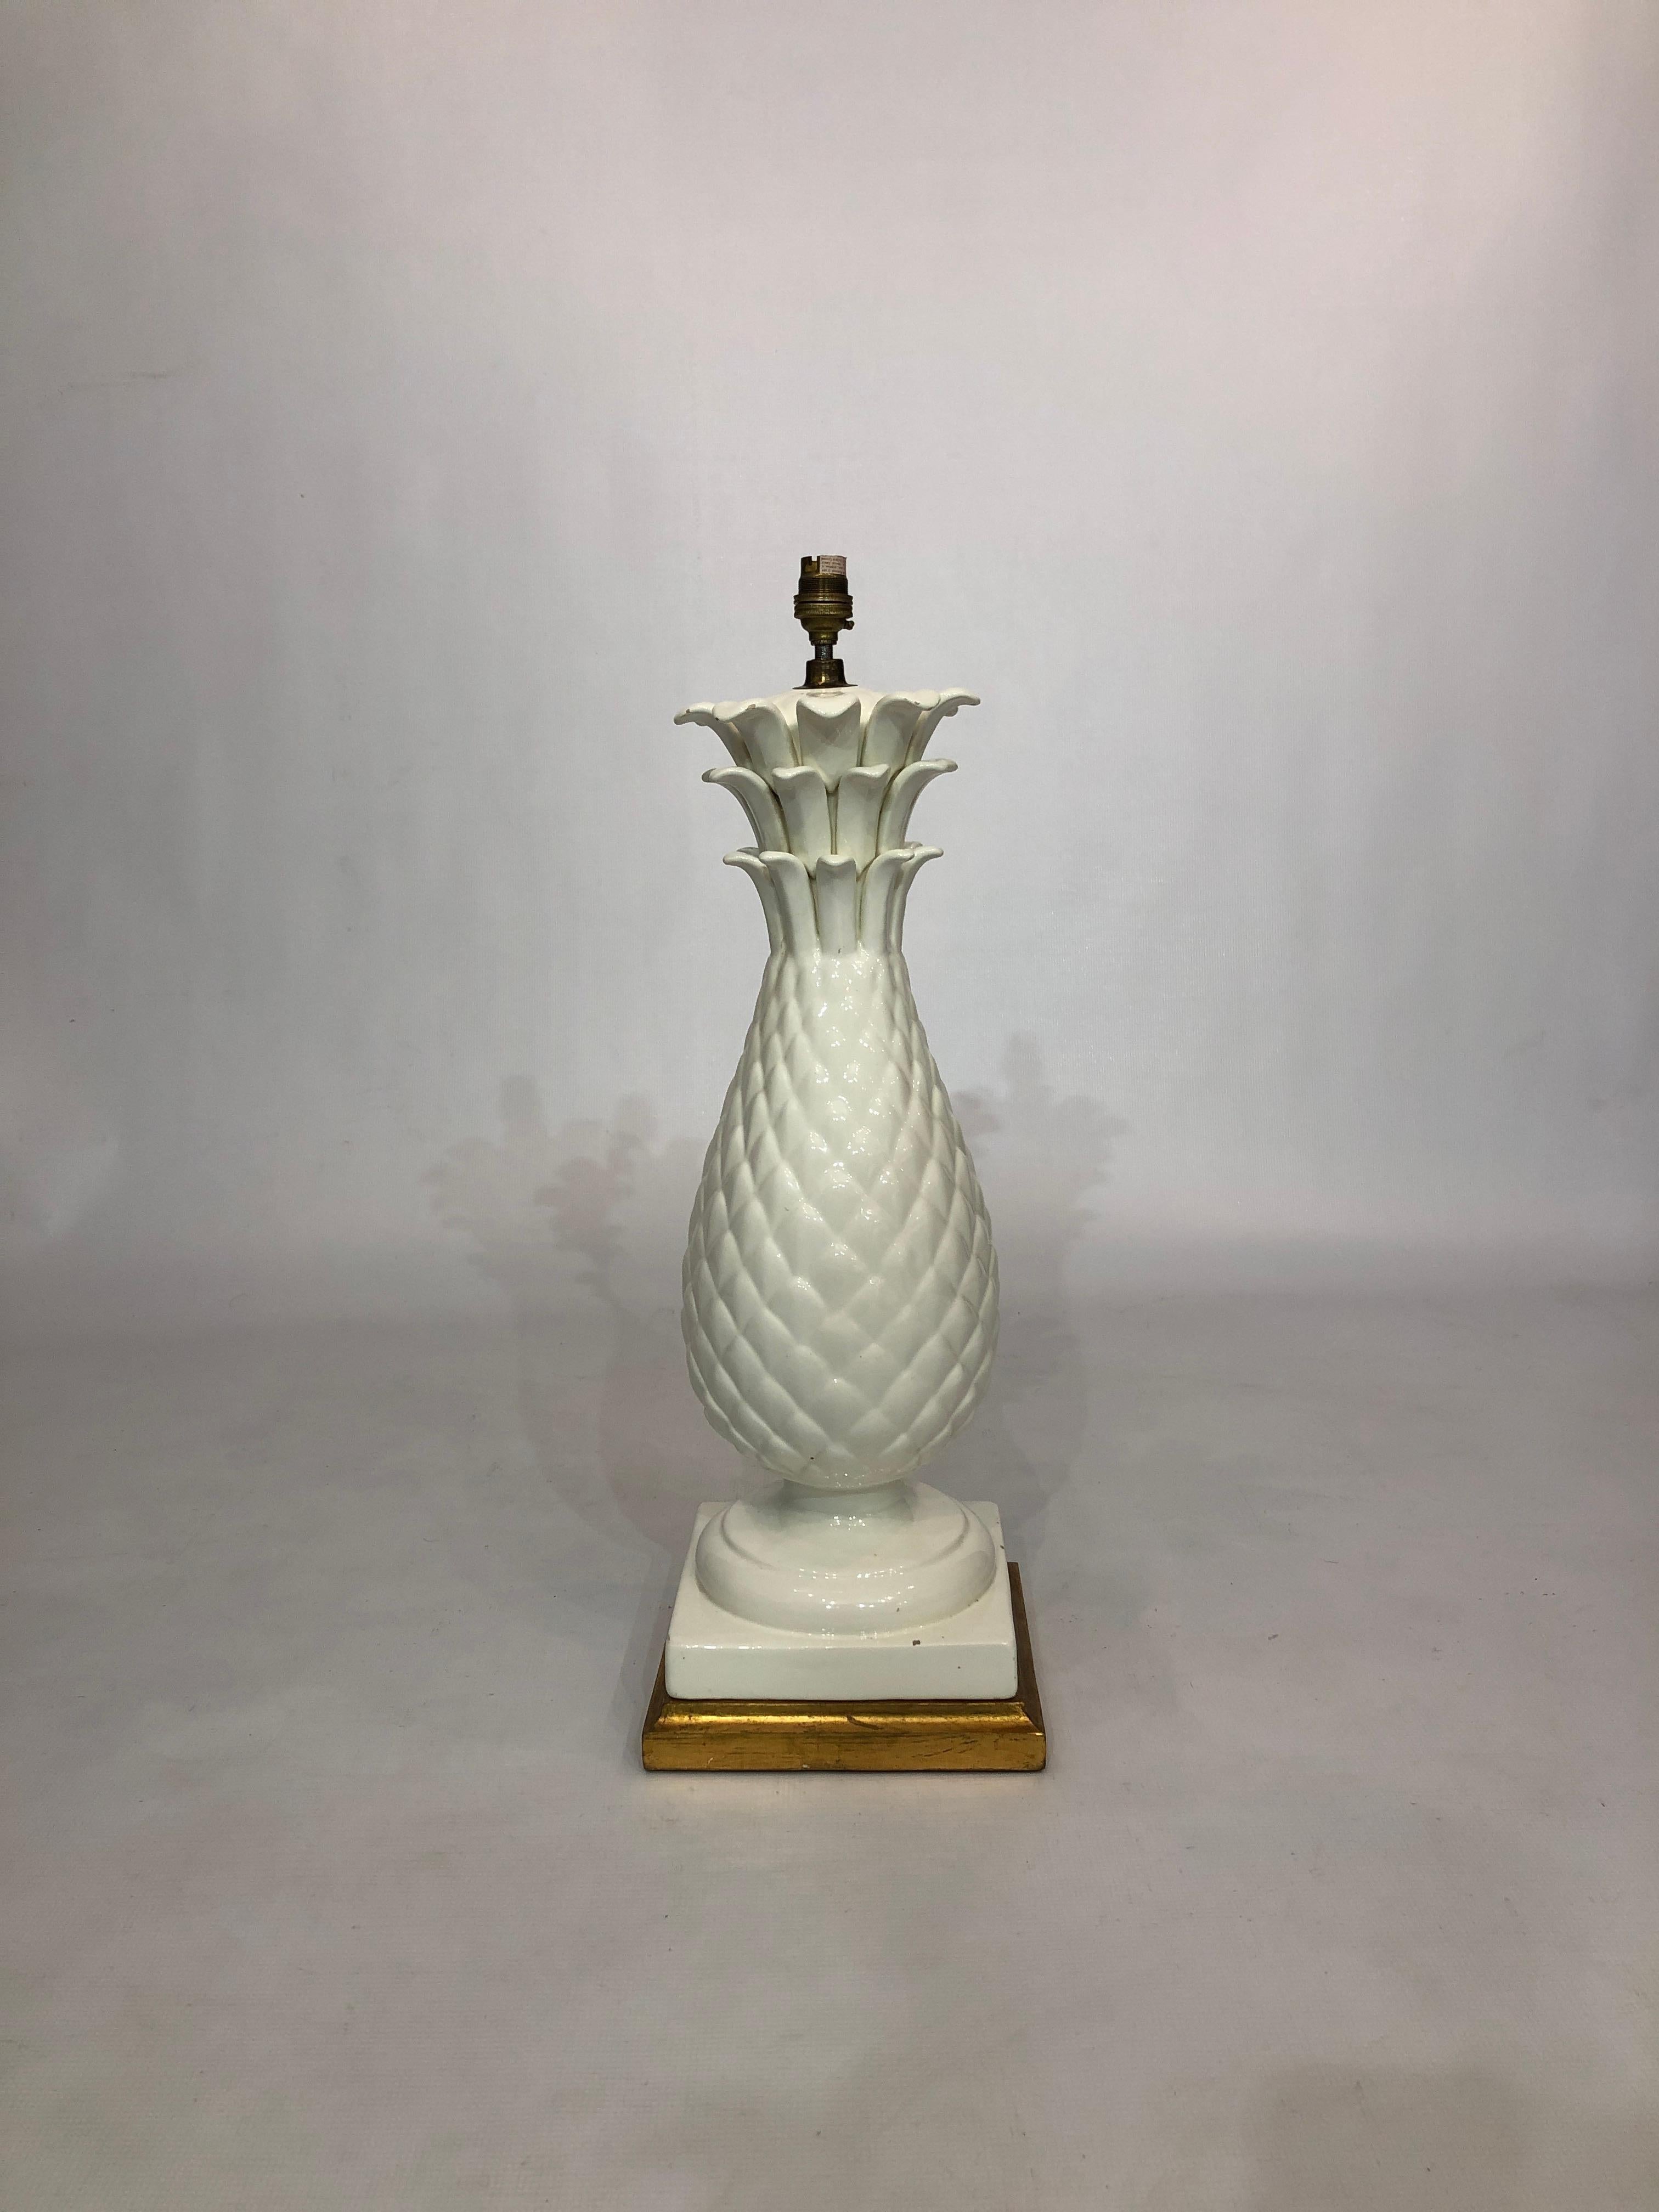 An elegant large white ceramic table lamp in pineapple design standing atop a square guilted base 

It would look amazing in lots of interiors and rooms.

Please contact us for international postage quotes.

CREATOR: Unknown

PLACE OF ORIGIN: